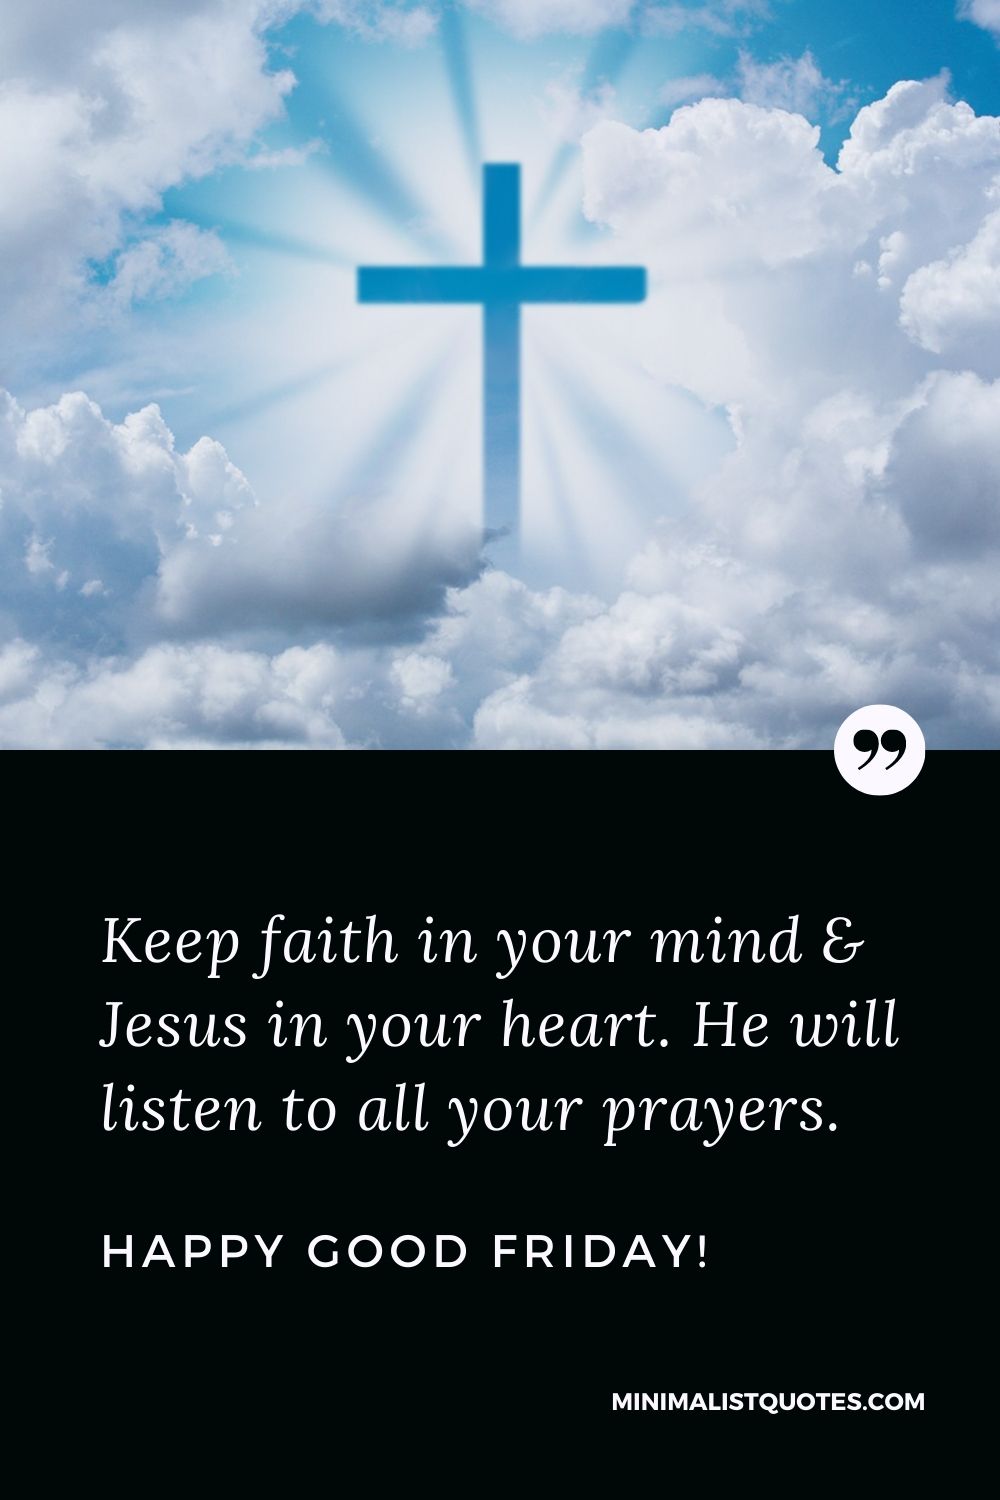 Keep faith in your mind & Jesus in your heart. He will listen to ...